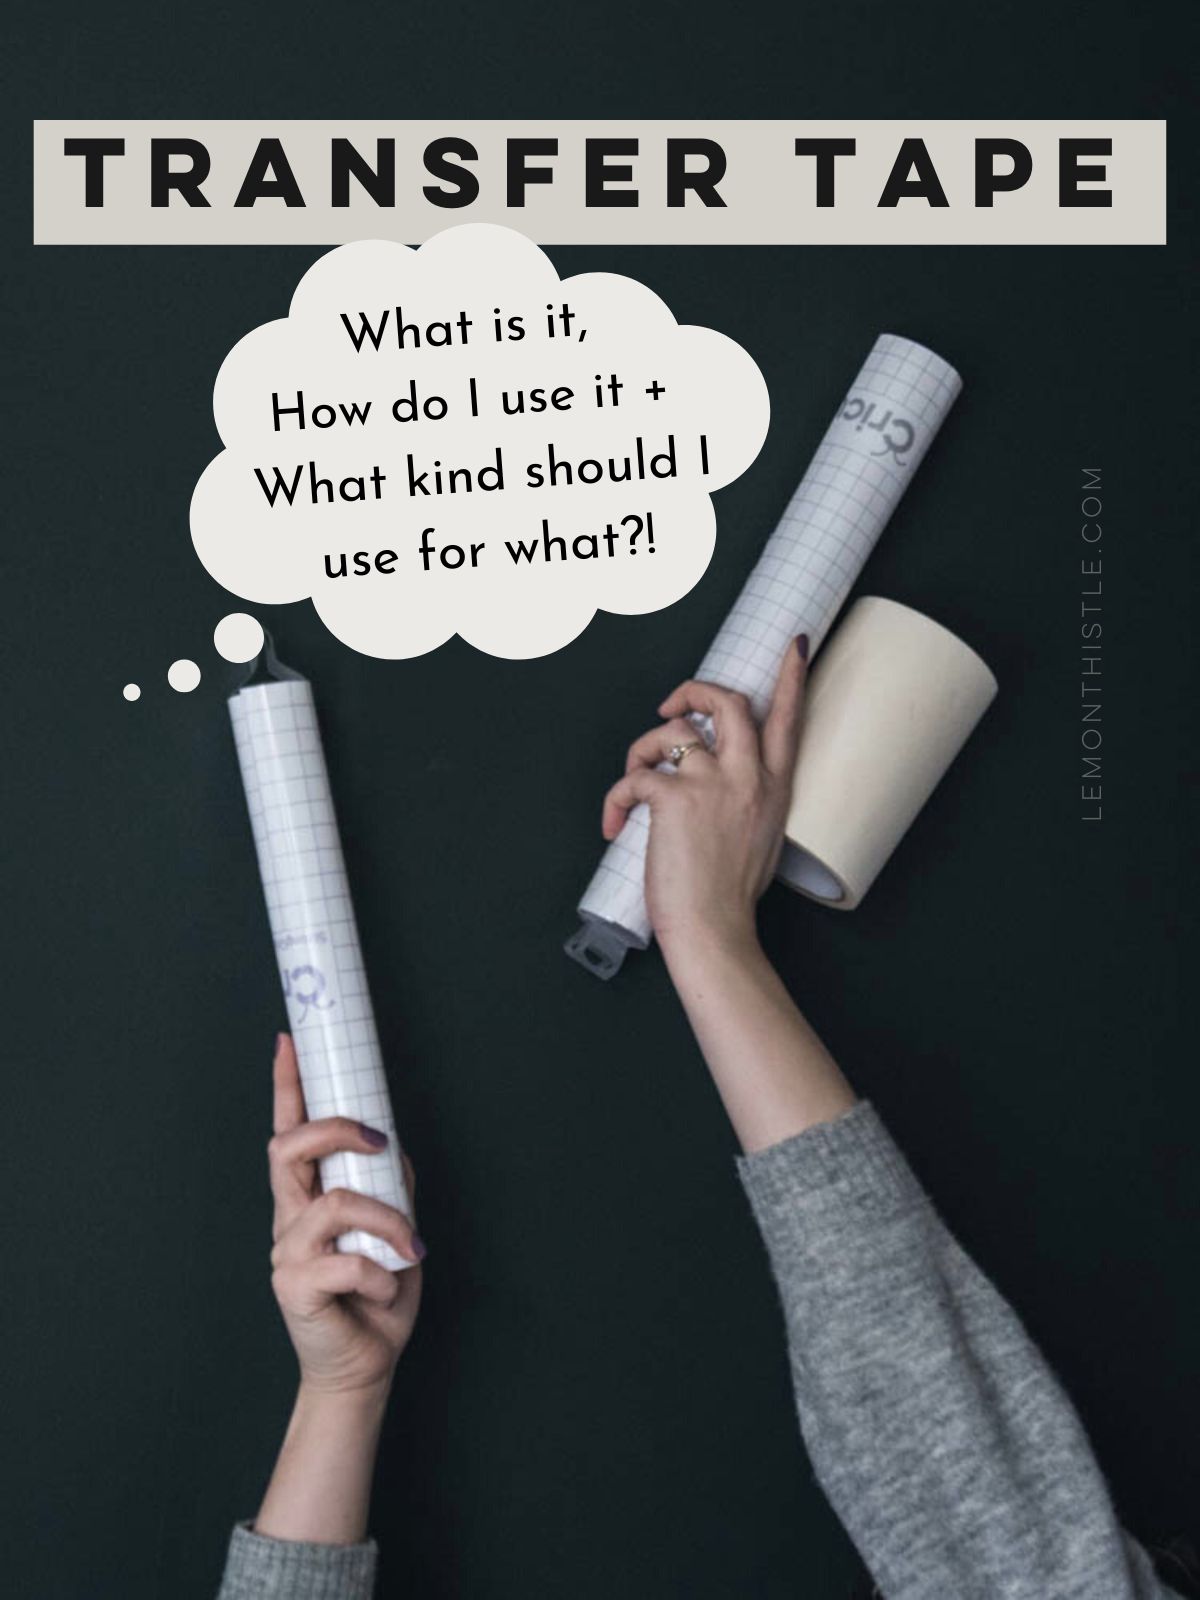 Pin image of hands holding transfer tape rolls with text over: Transfer tape: what is it, how do I use it + what kind should I use for what?!